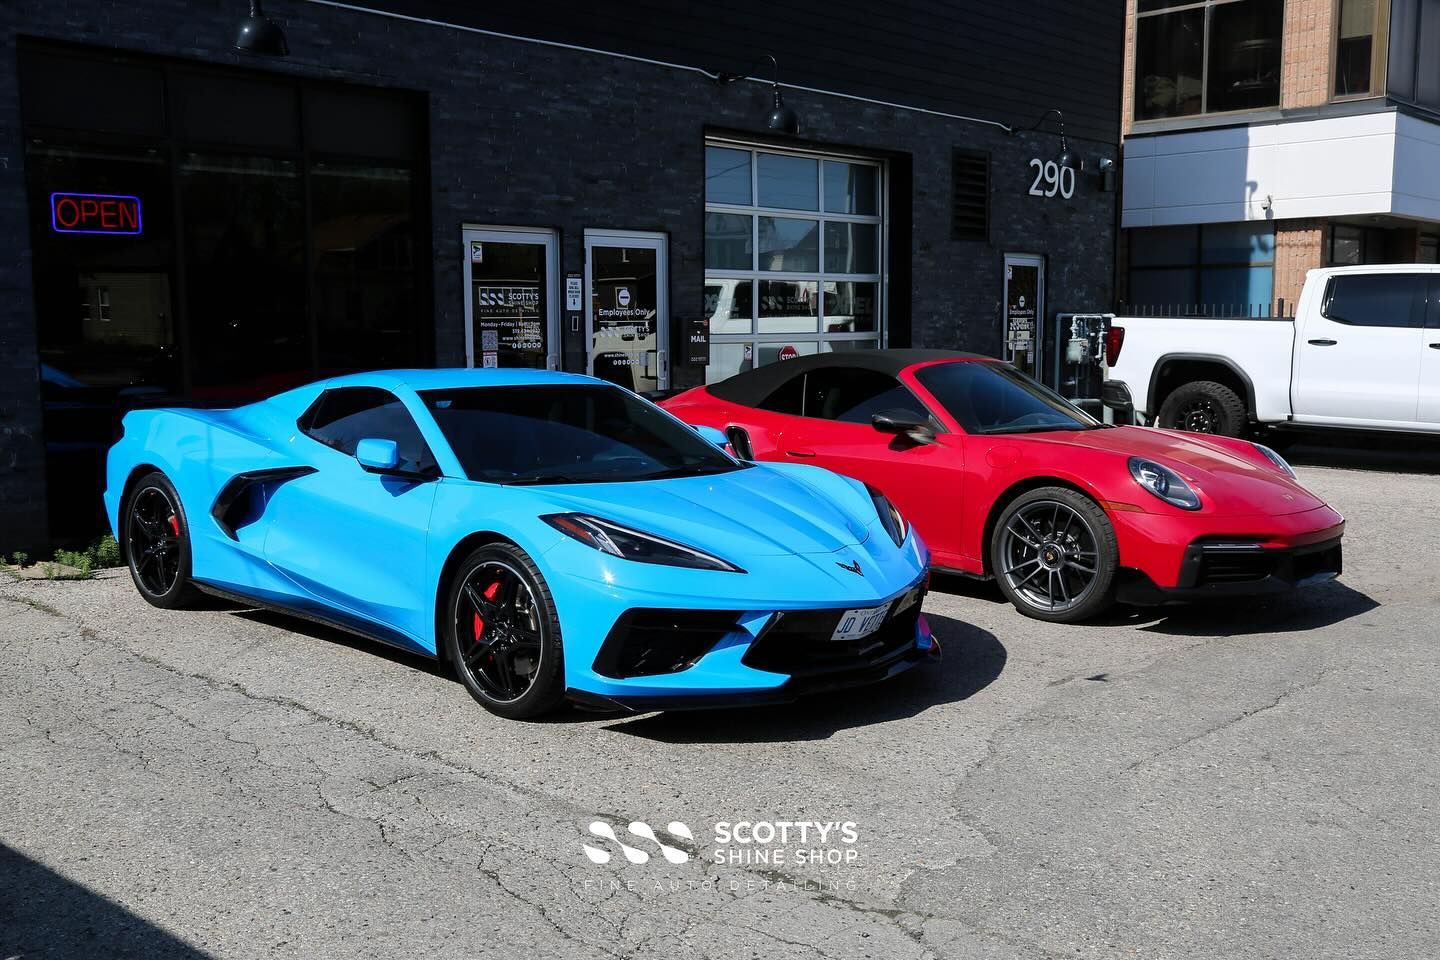 Choose your weapon! It’s window tint season and all the coolest cars are heading to the shop for our